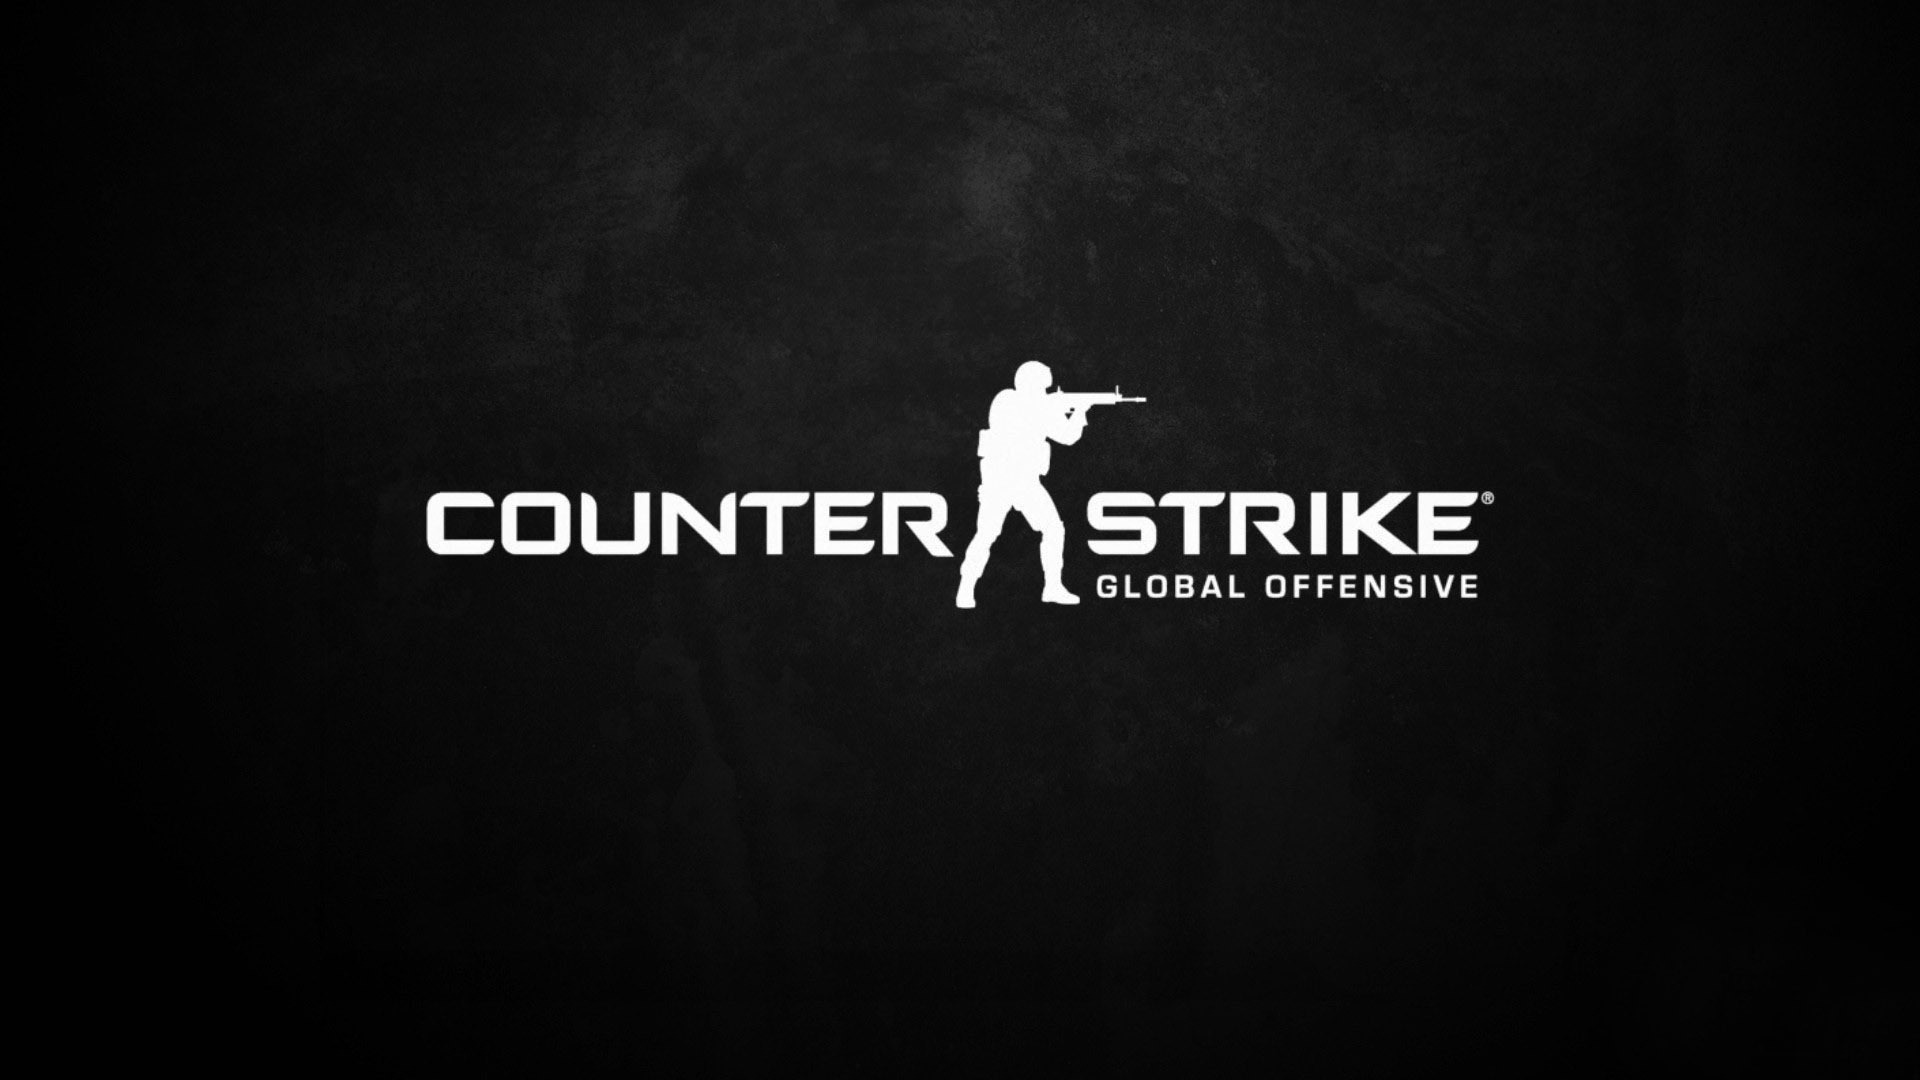 Counter Strike Wallpapers, Pictures, Images